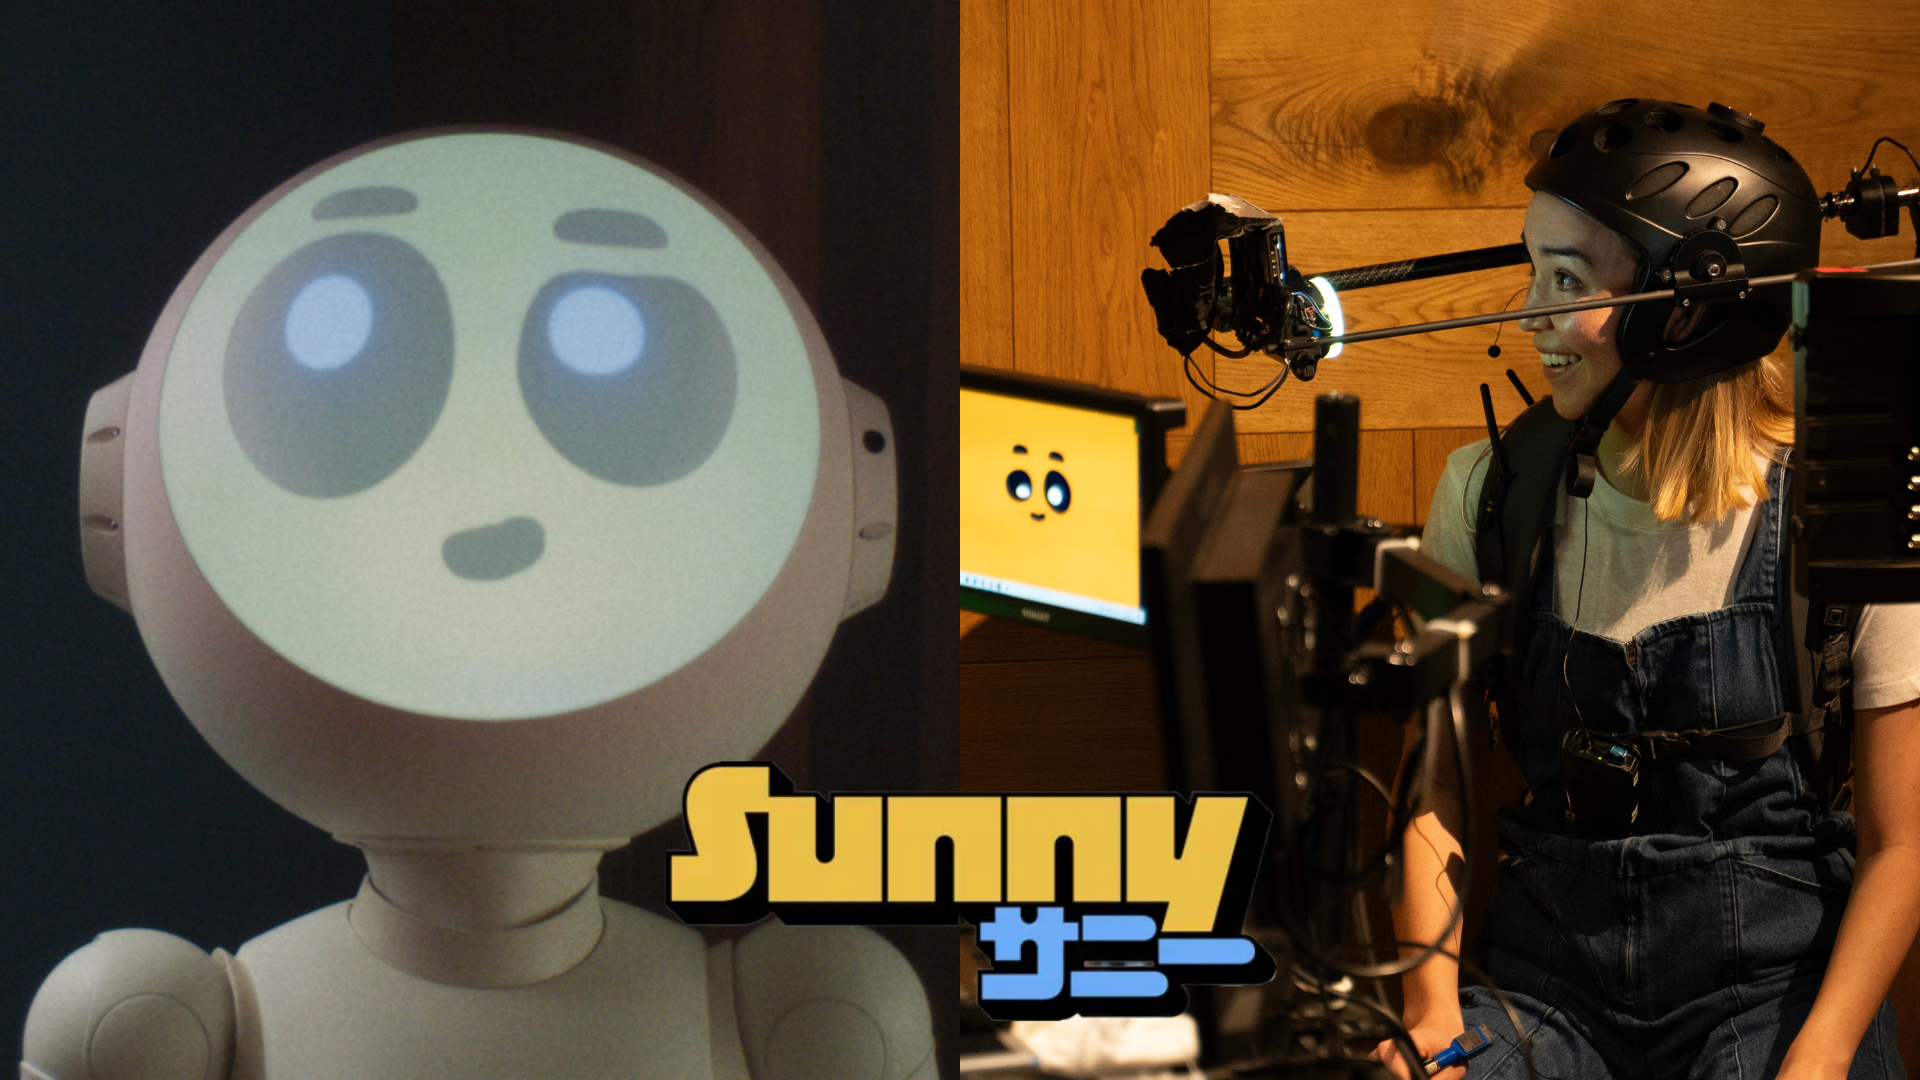 Juxtaposed images of Sunny the homebot on the left and Joanna Sotomura in her animation gear on the right. The 